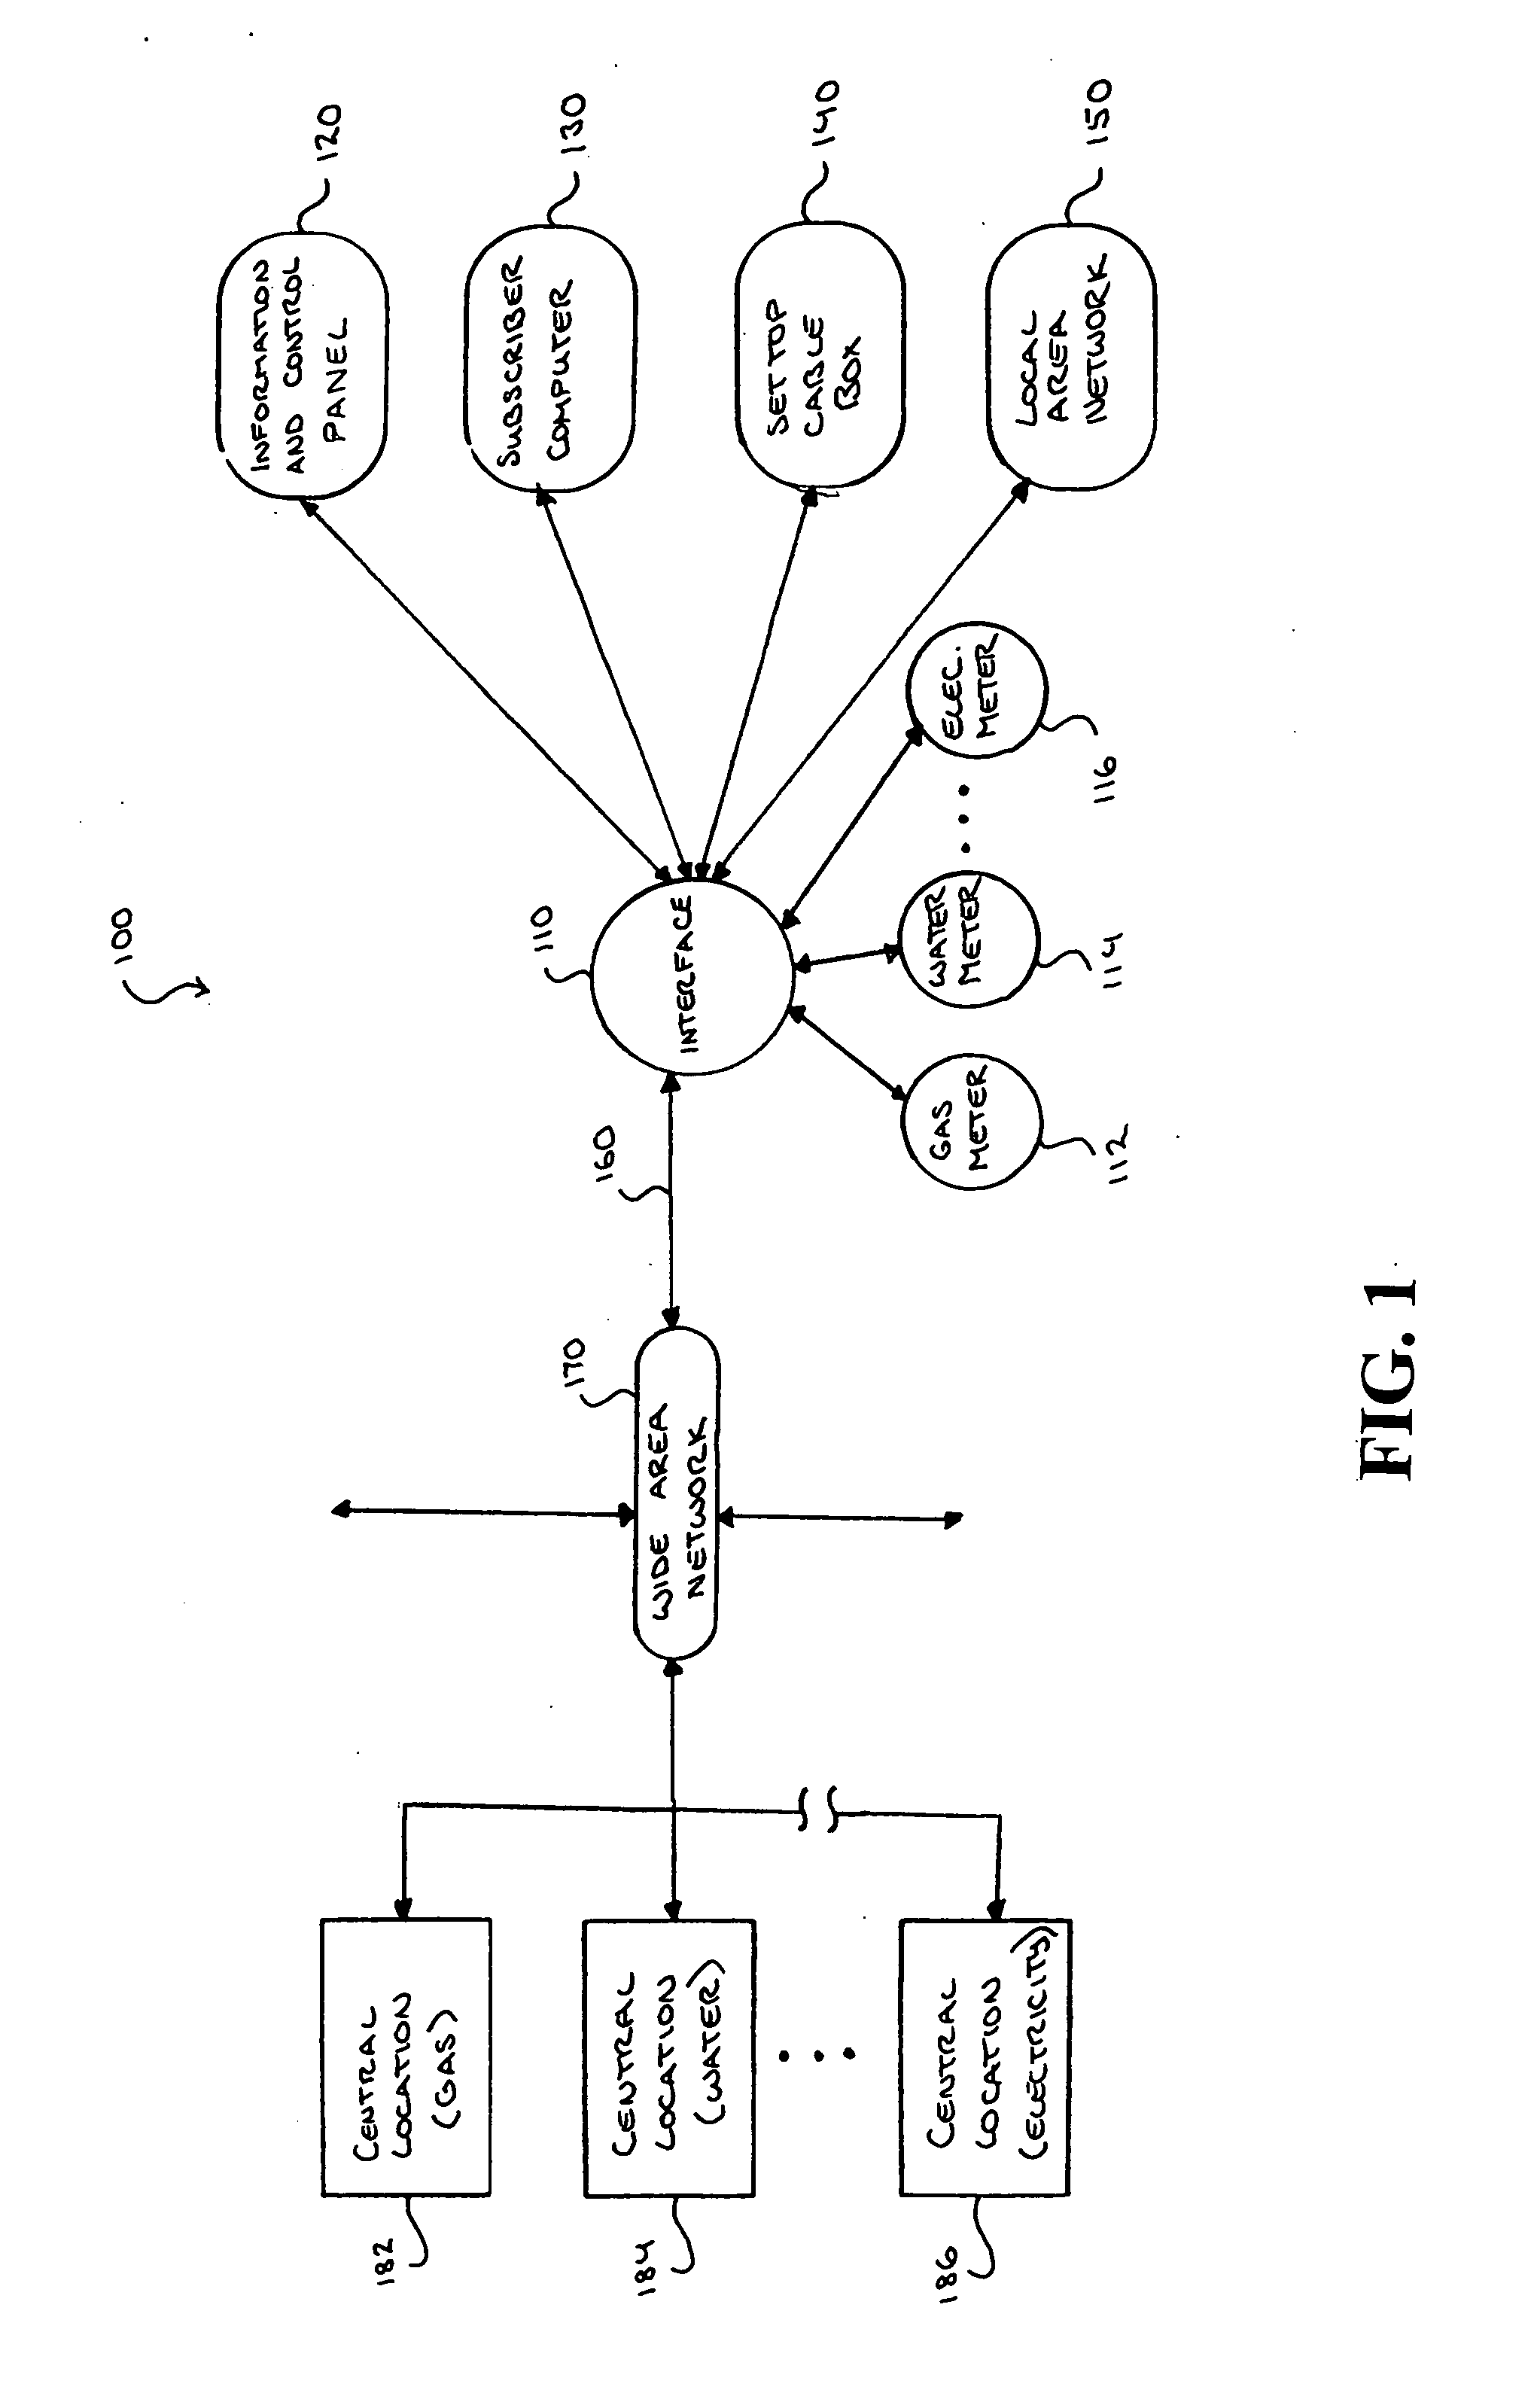 Integrated metrology systems and information and control apparatus for interaction with integrated metrology systems